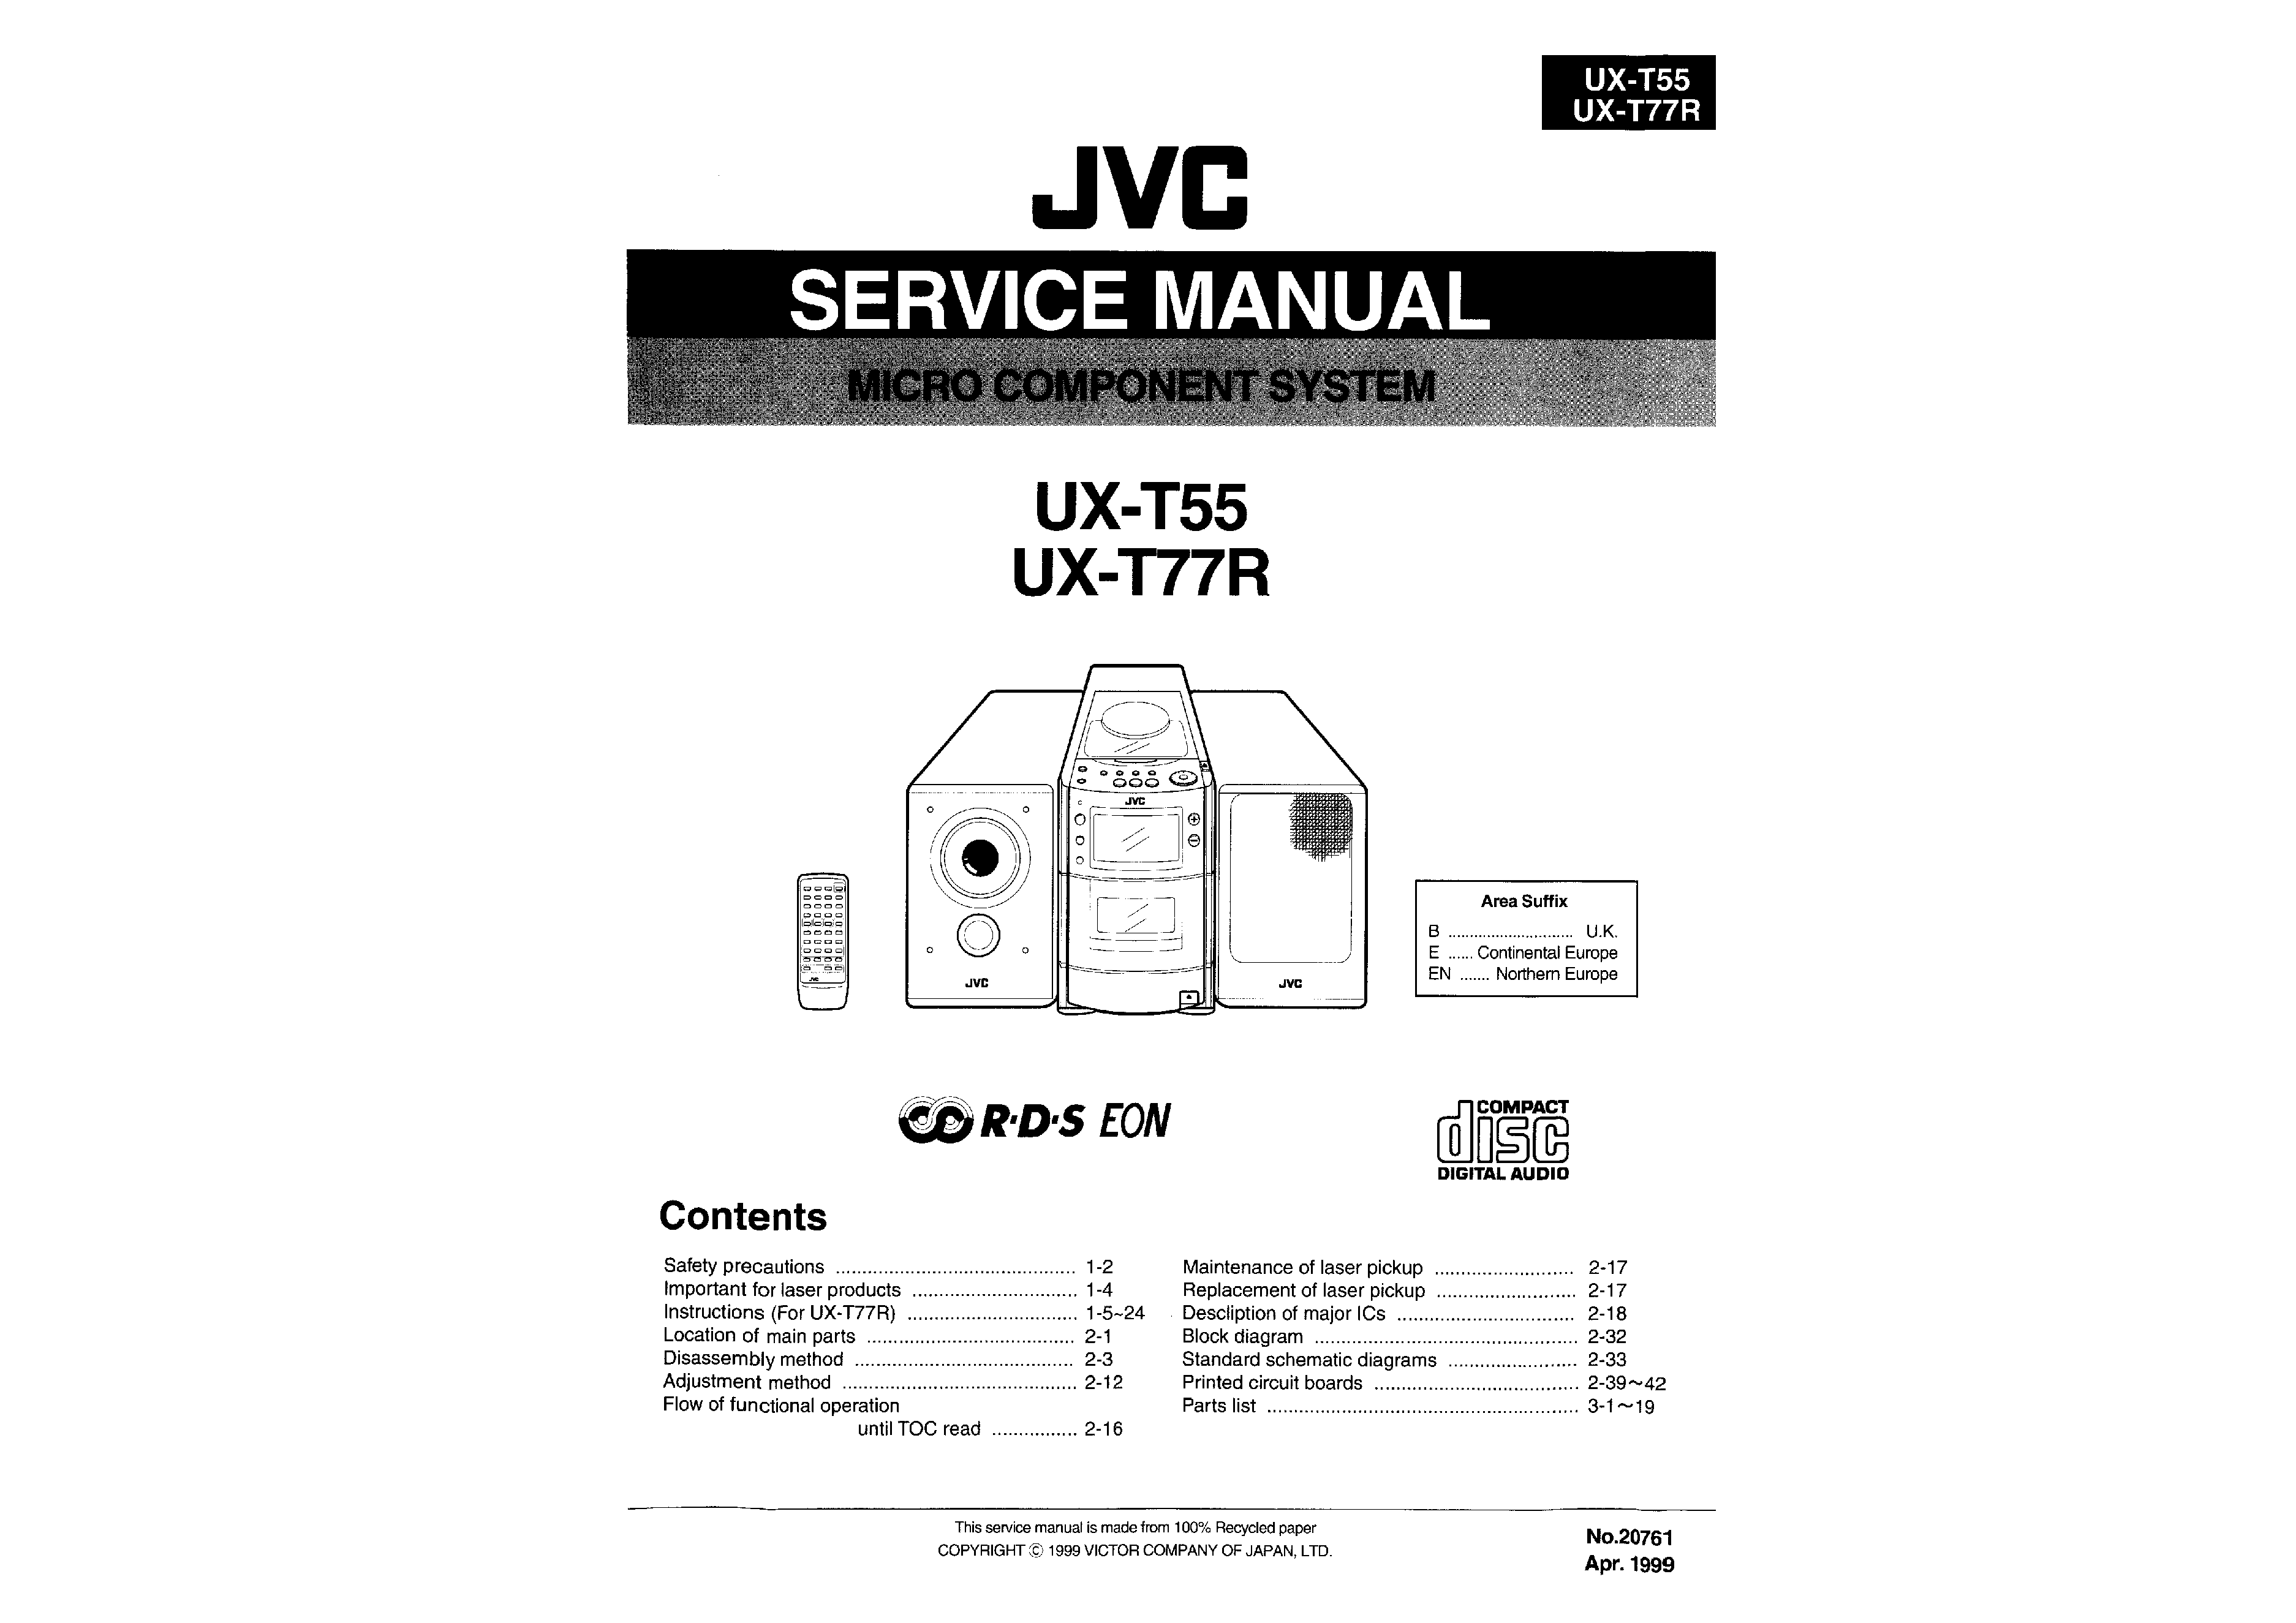 Jvc owners manual download